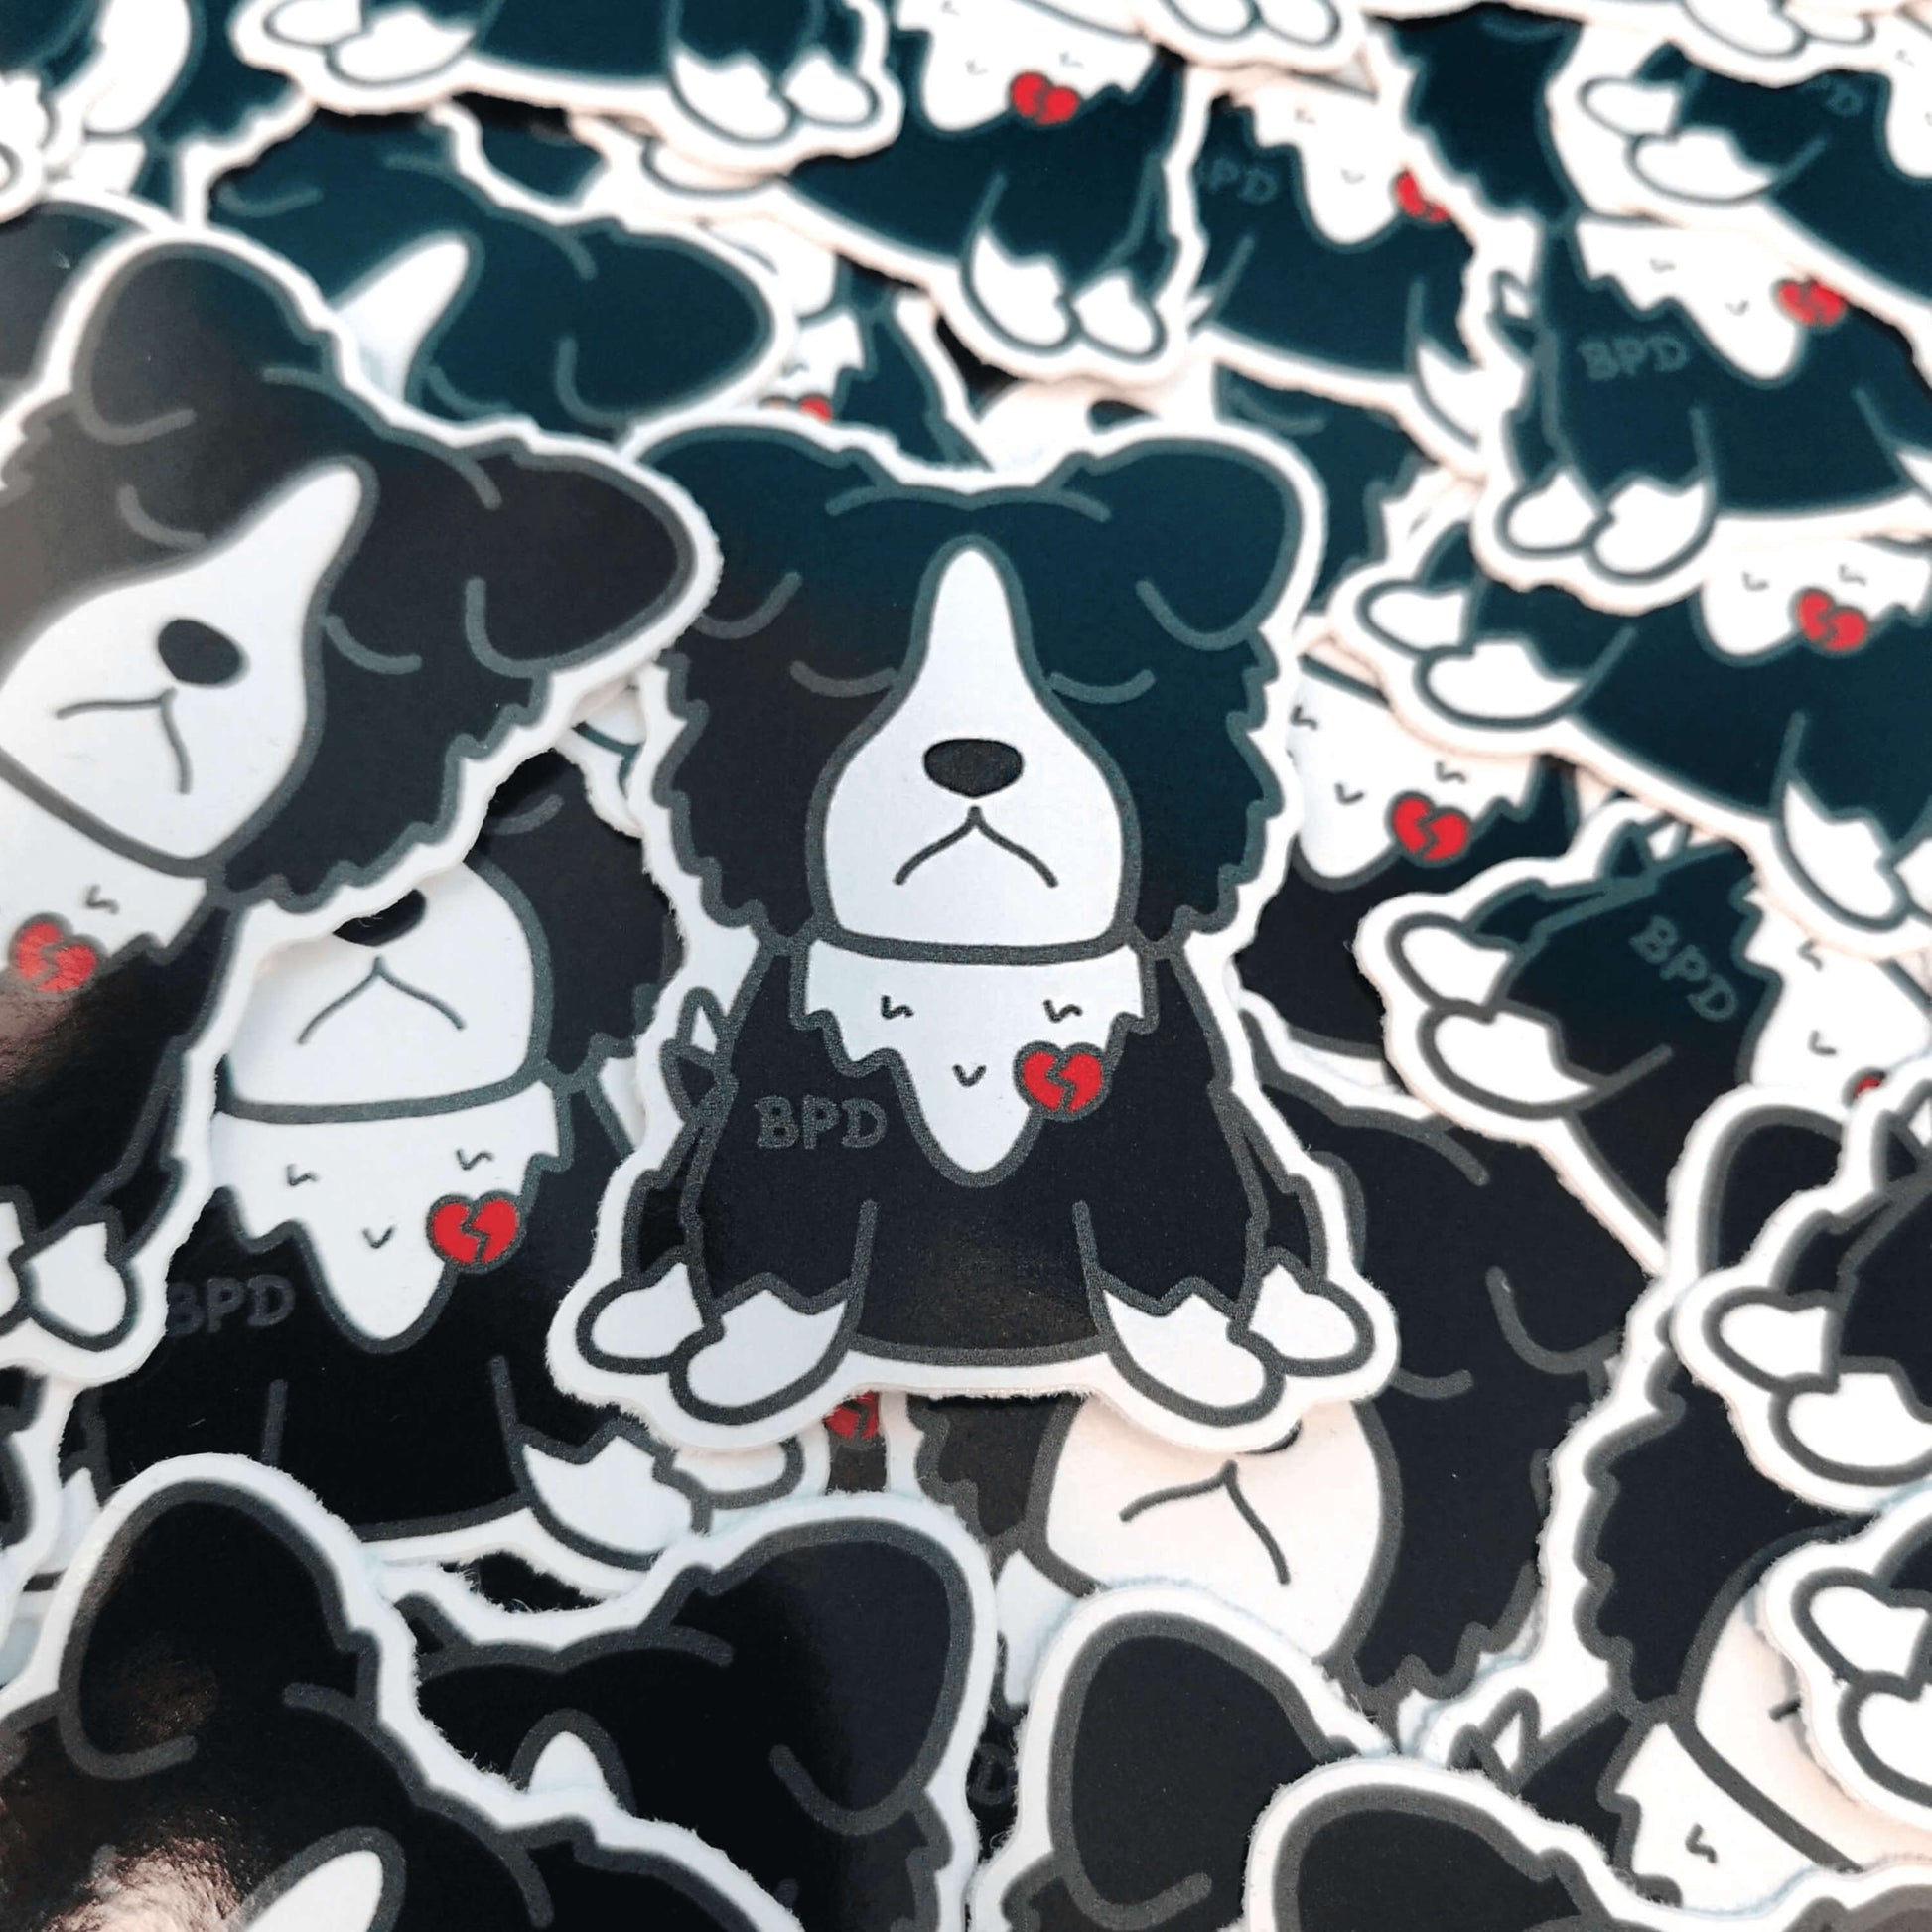 BPD Sticker - Borderline Personality Disorder laid amongst a pile of other bpd dog stickers. The black and white sad fluffy dog sticker has a broken heart with BPD written across its chest. The sticker is designed to raise awareness for Borderline Personality Disorder.